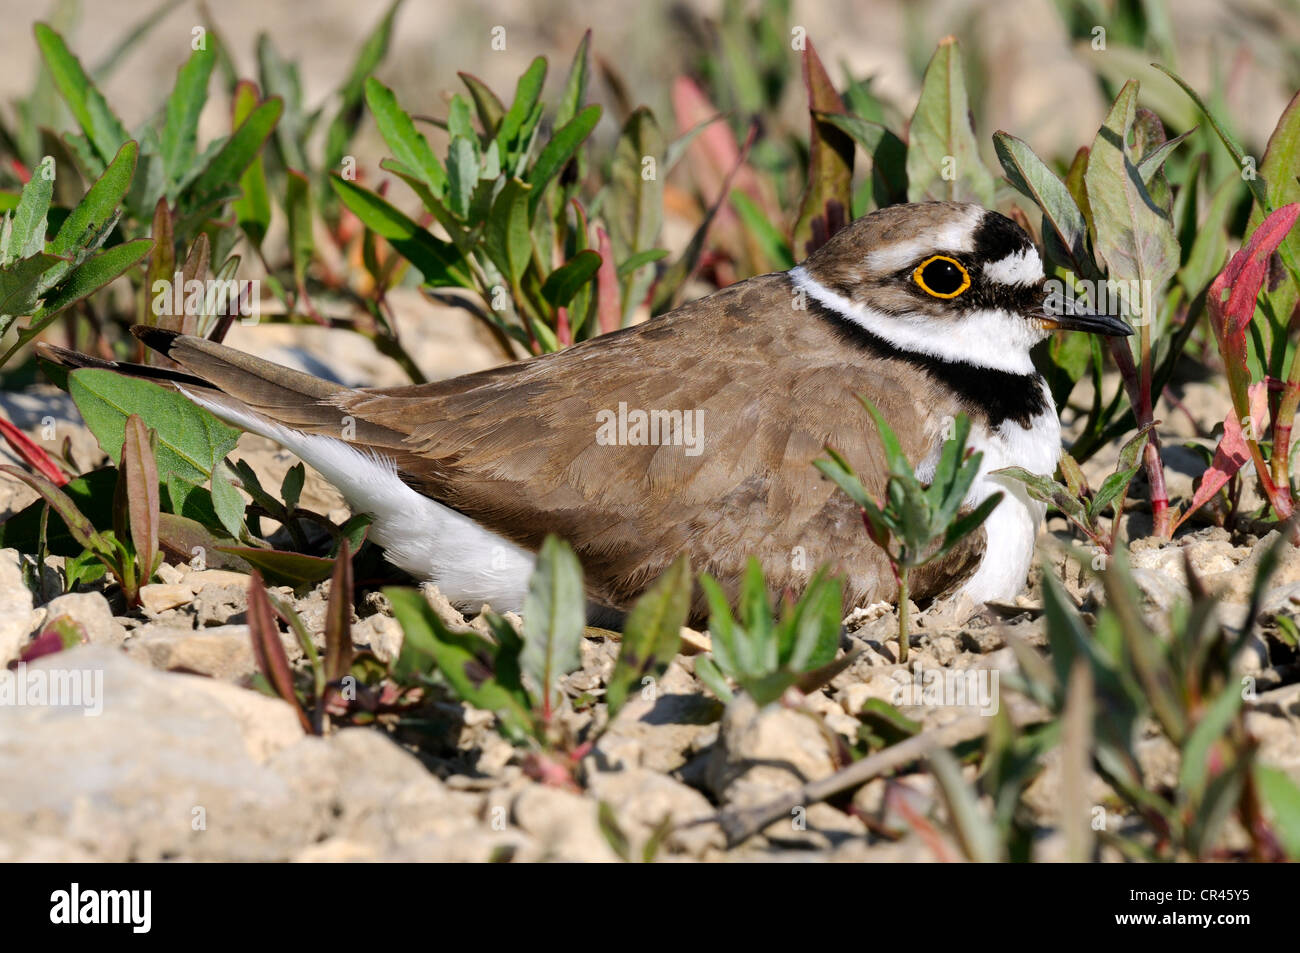 Little ringed plover (Charadrius dubius), brooding, Lechauen, wetlands of the Lech River, Swabia region, Bavaria Stock Photo